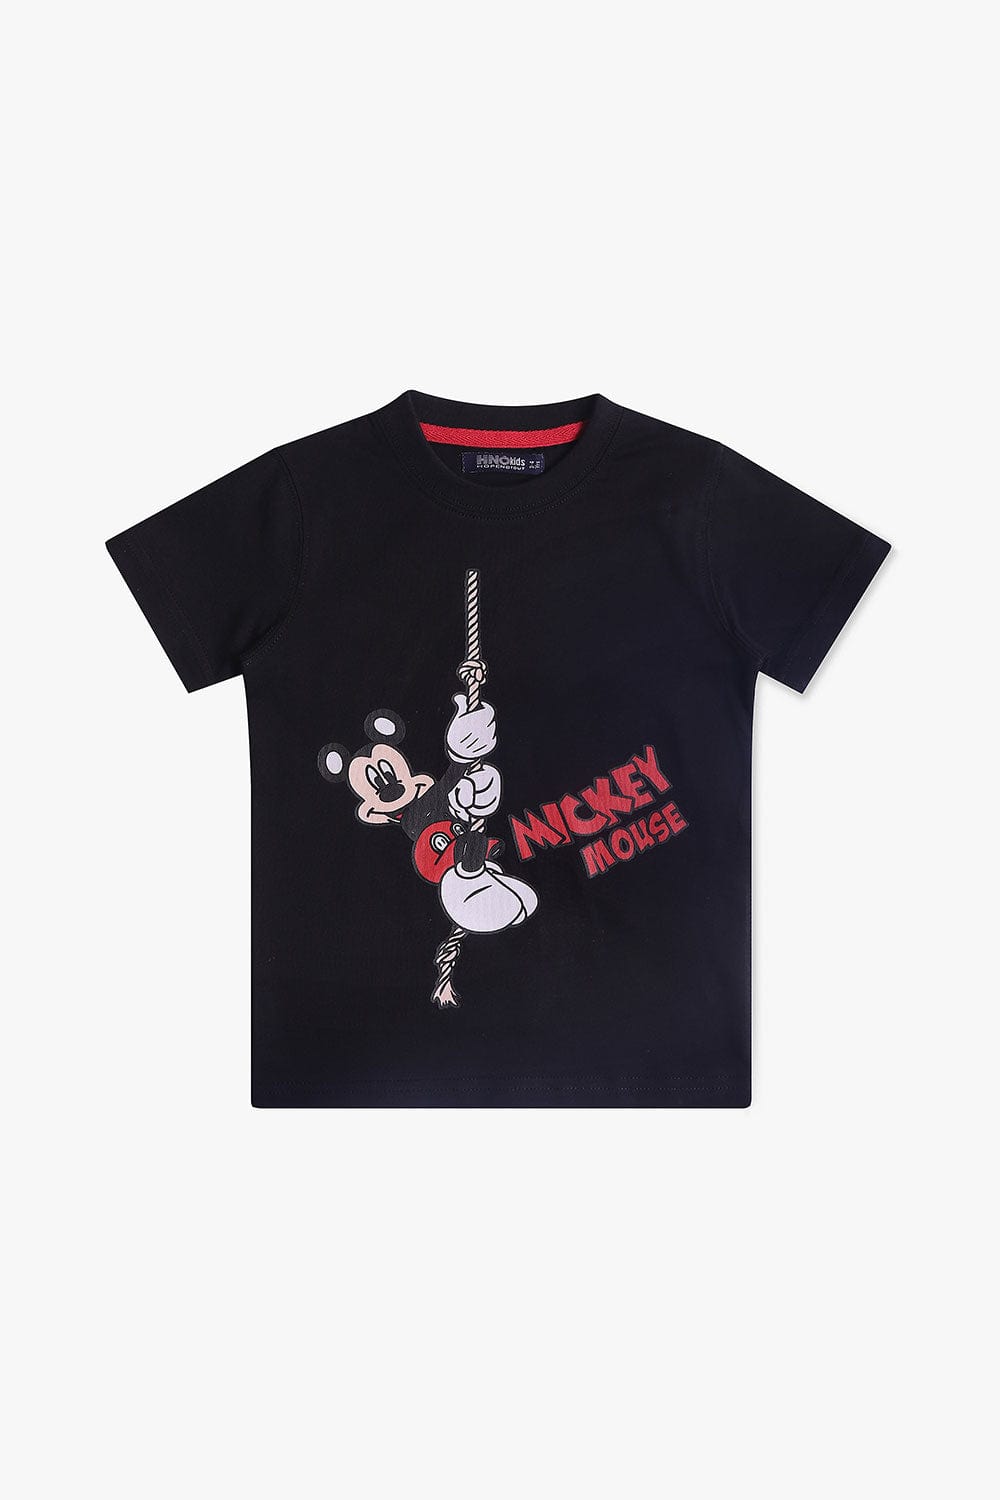 Hope Not Out by Shahid Afridi Boys Knit T-Shirt Mickey Mouse T-Shirt